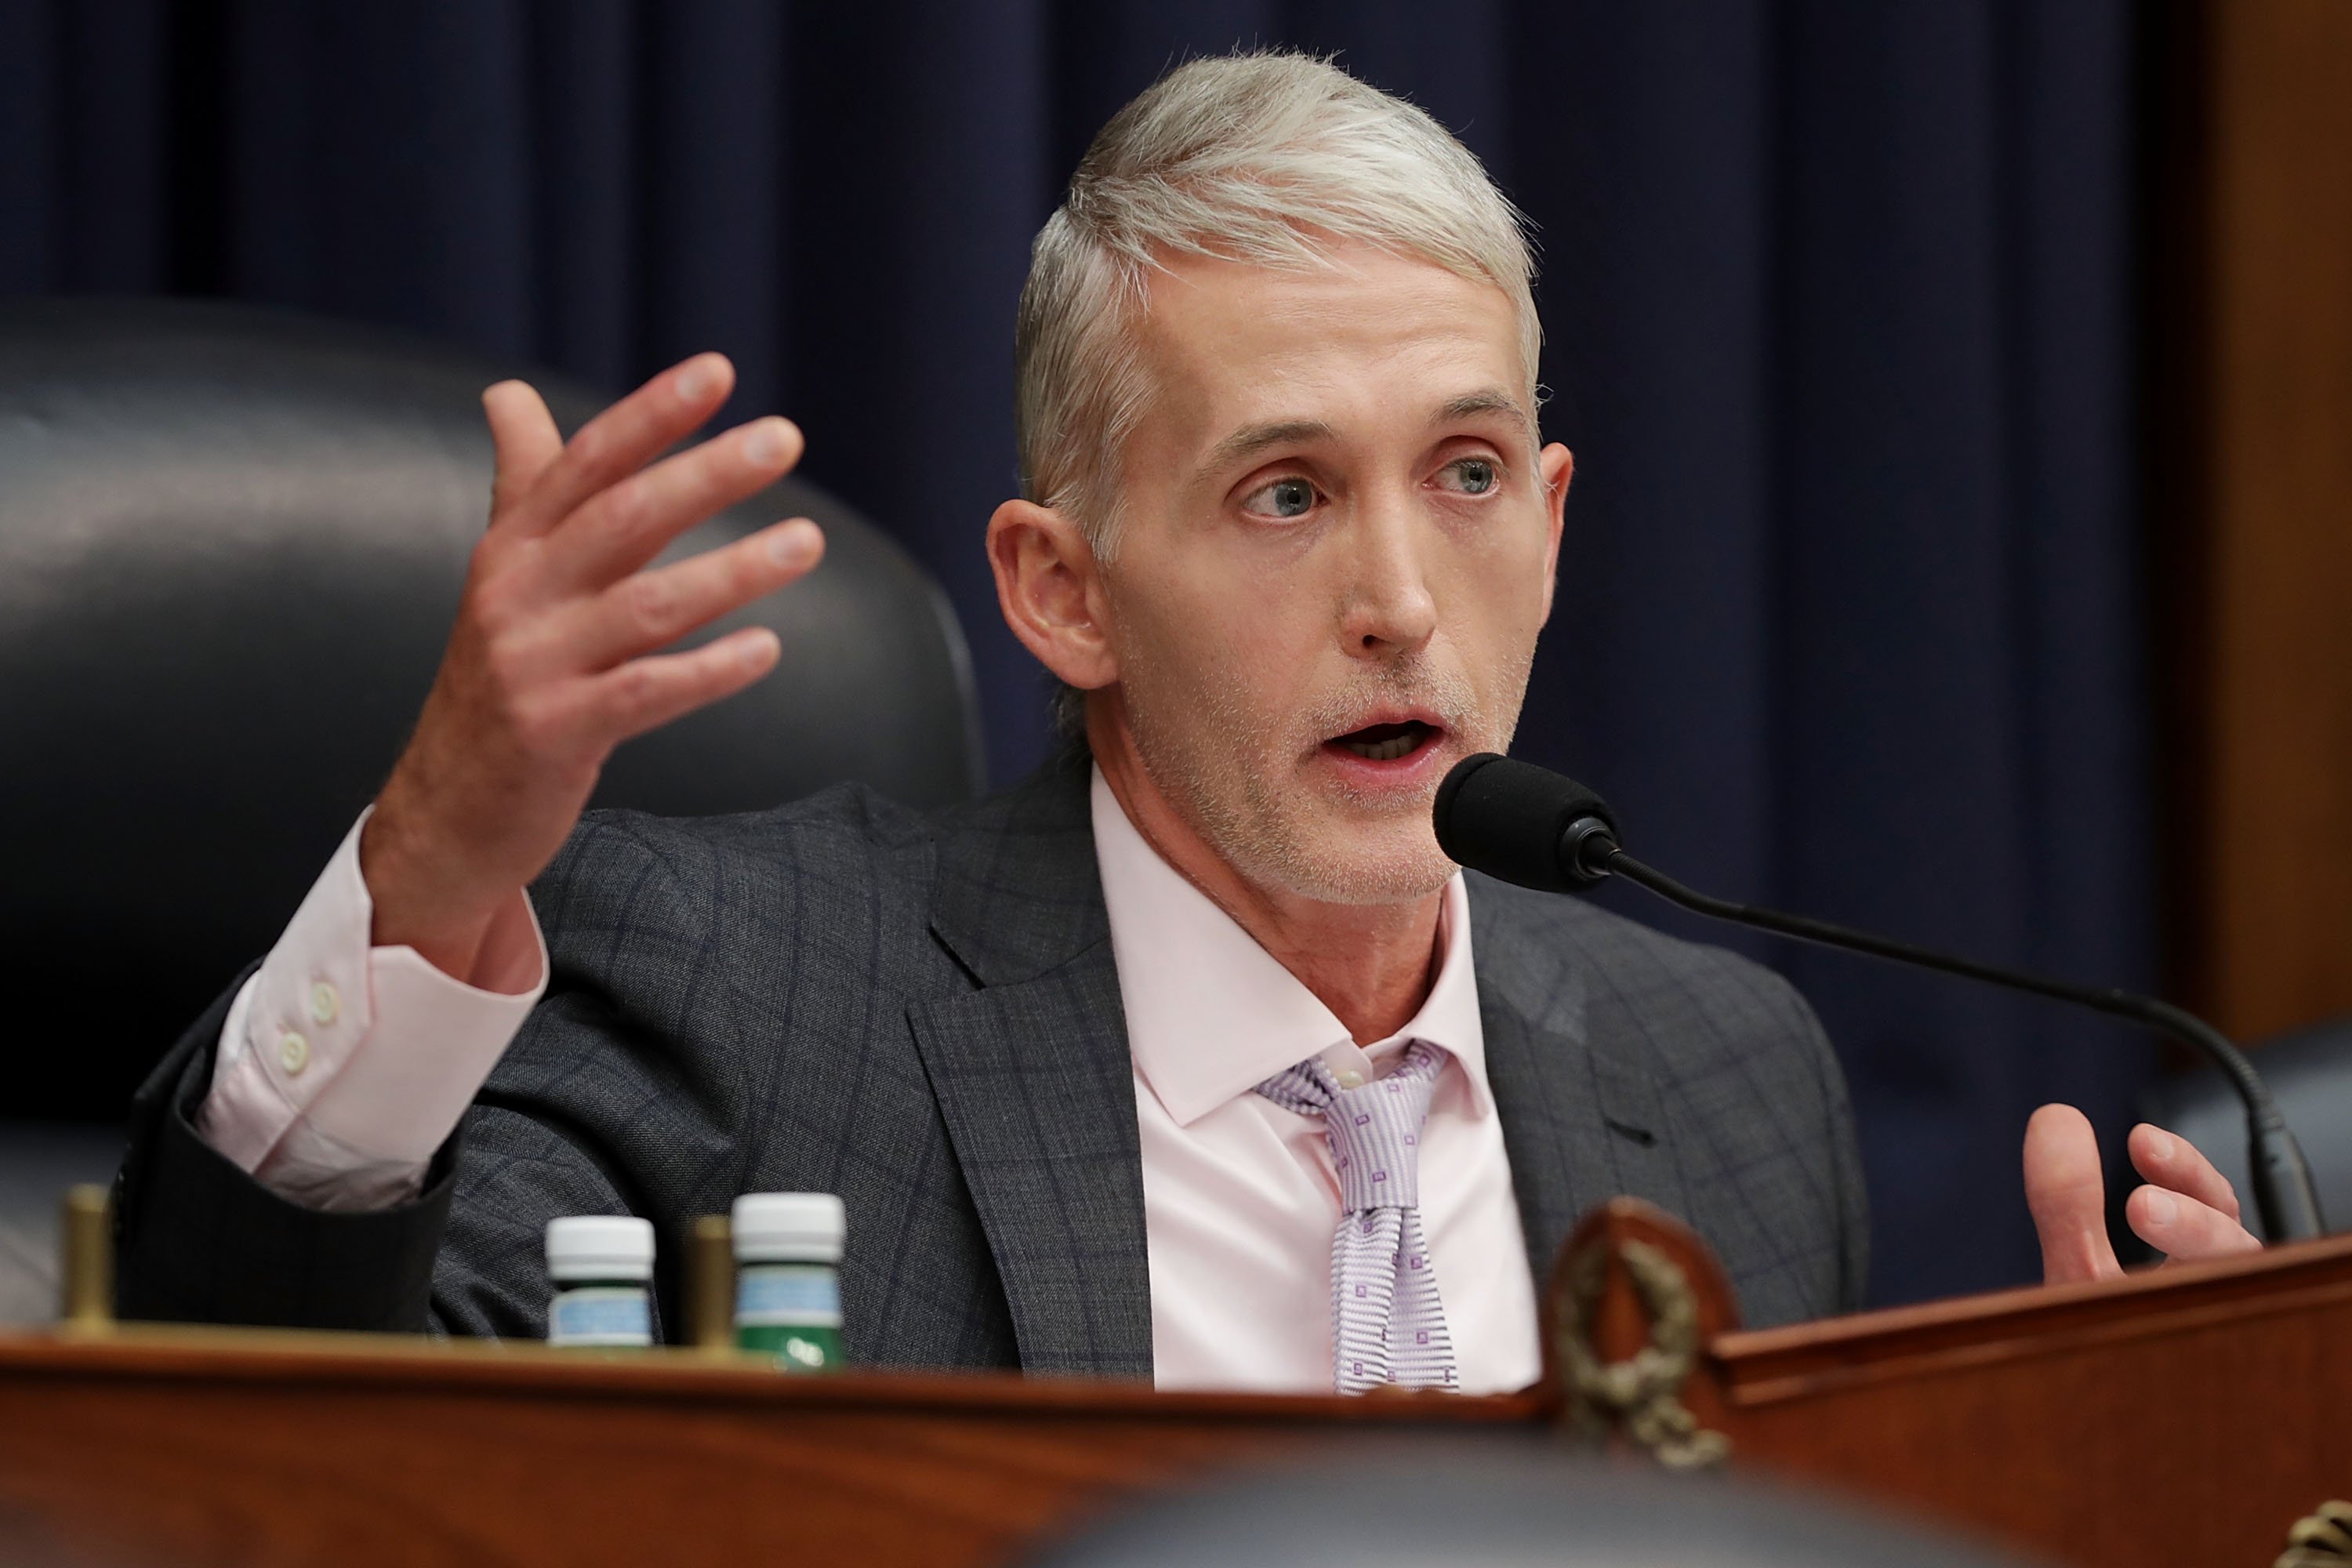 WASHINGTON, DC - JULY 12: House Oversight and Government Reform Committee Chairman Trey Gowdy (R-SC) questions Deputy Assistant FBI Director Peter Strzok during ajoint hearing of his committee and the House Judiciary Committee in the Rayburn House Office Building on Capitol Hill July 12, 2018 in Washington, DC. While involved in the probe into Hillary ClintonÕs use of a private email server in 2016, Strzok exchanged text messages with FBI attorney Lisa Page that were critical of Trump. After learning about the messages, Mueller removed Strzok from his investigation into whether the Trump campaign colluded with Russia to win the 2016 presidential election. (Photo by Chip Somodevilla/Getty Images)